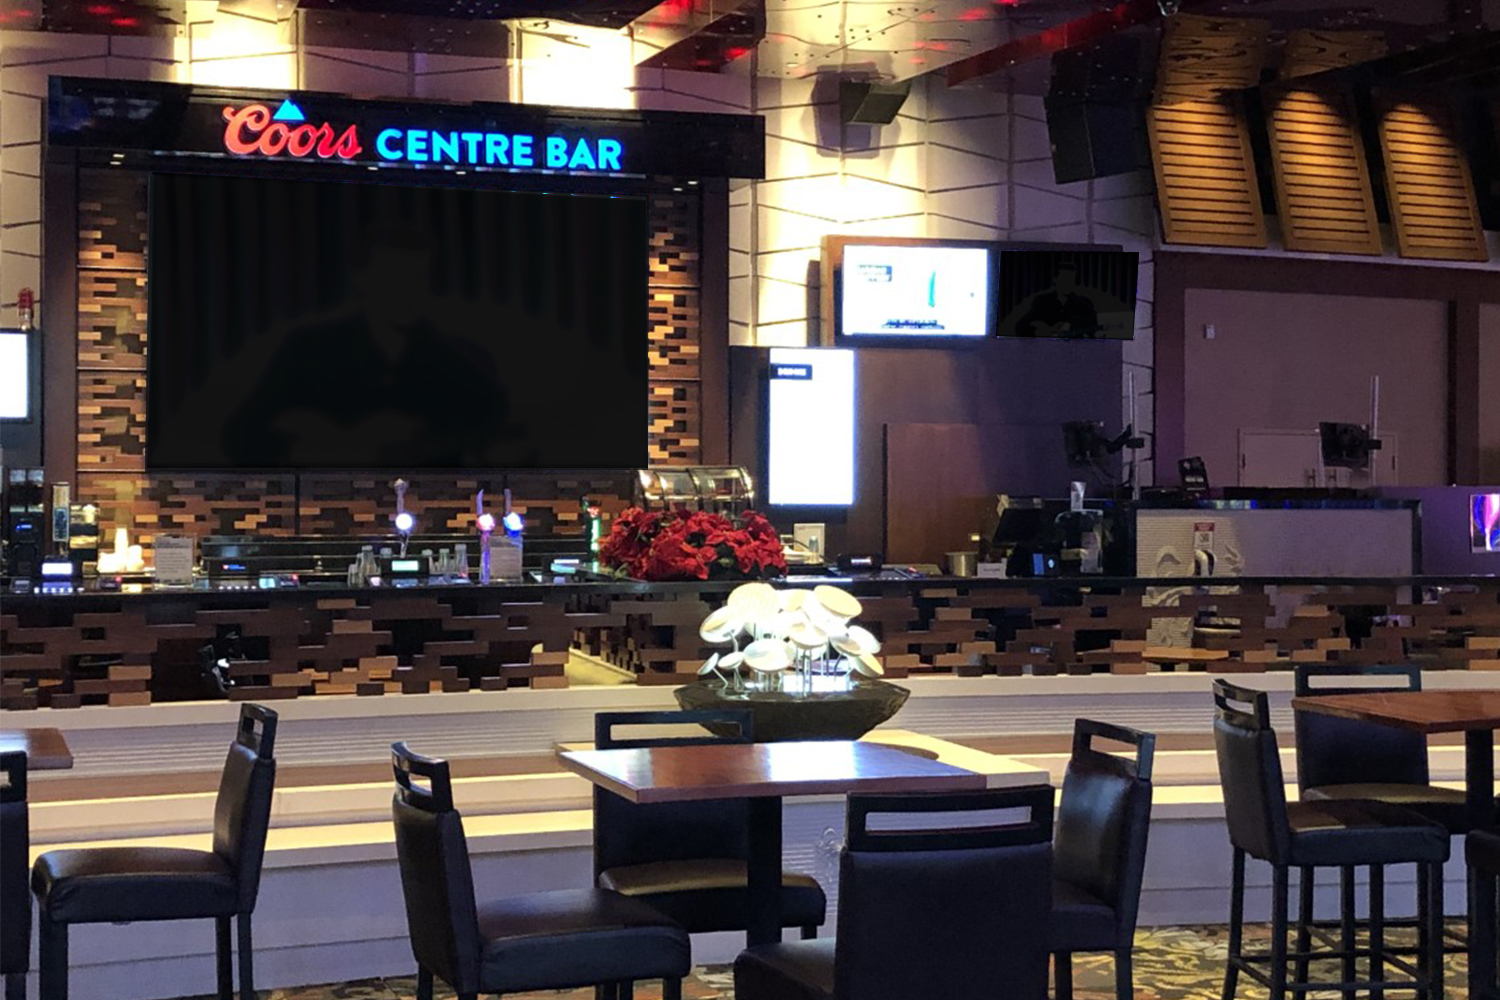 Tables and chairs and large TV screen and serving area in the background with Coors Centre Bar logos on top